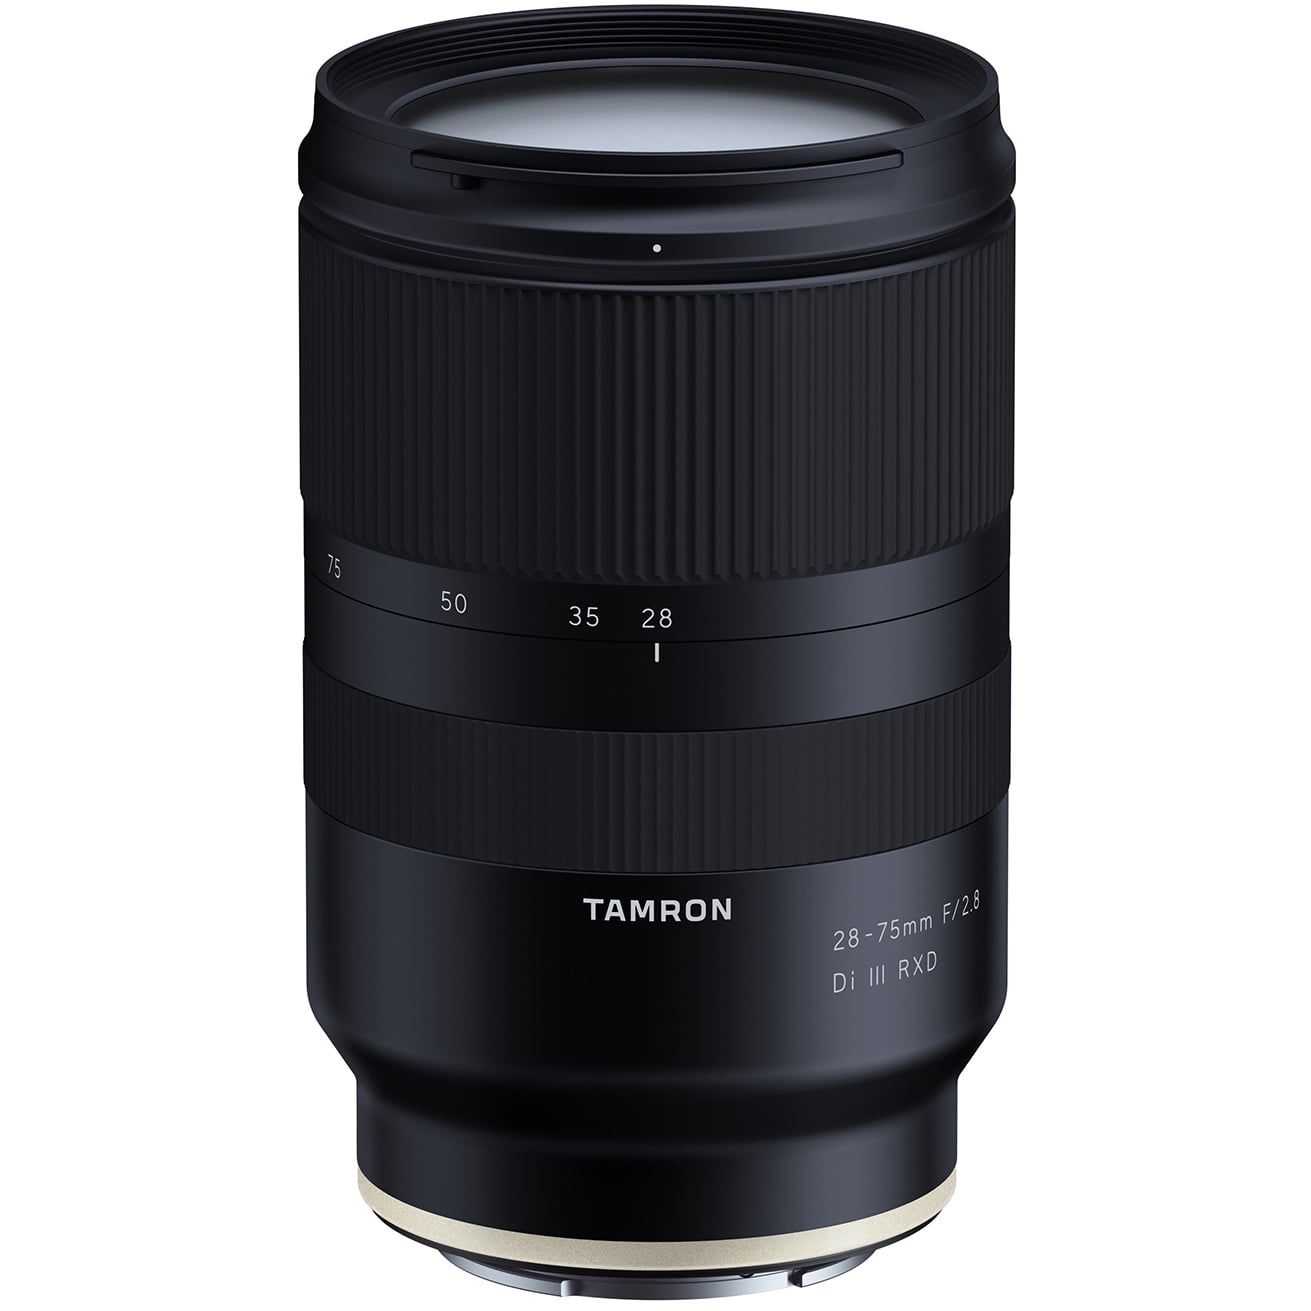 TAMRON 28-75mm f/2.8 Di III RXD F/SONY, E-MOUNT/FULL-FRAME FORMAT 